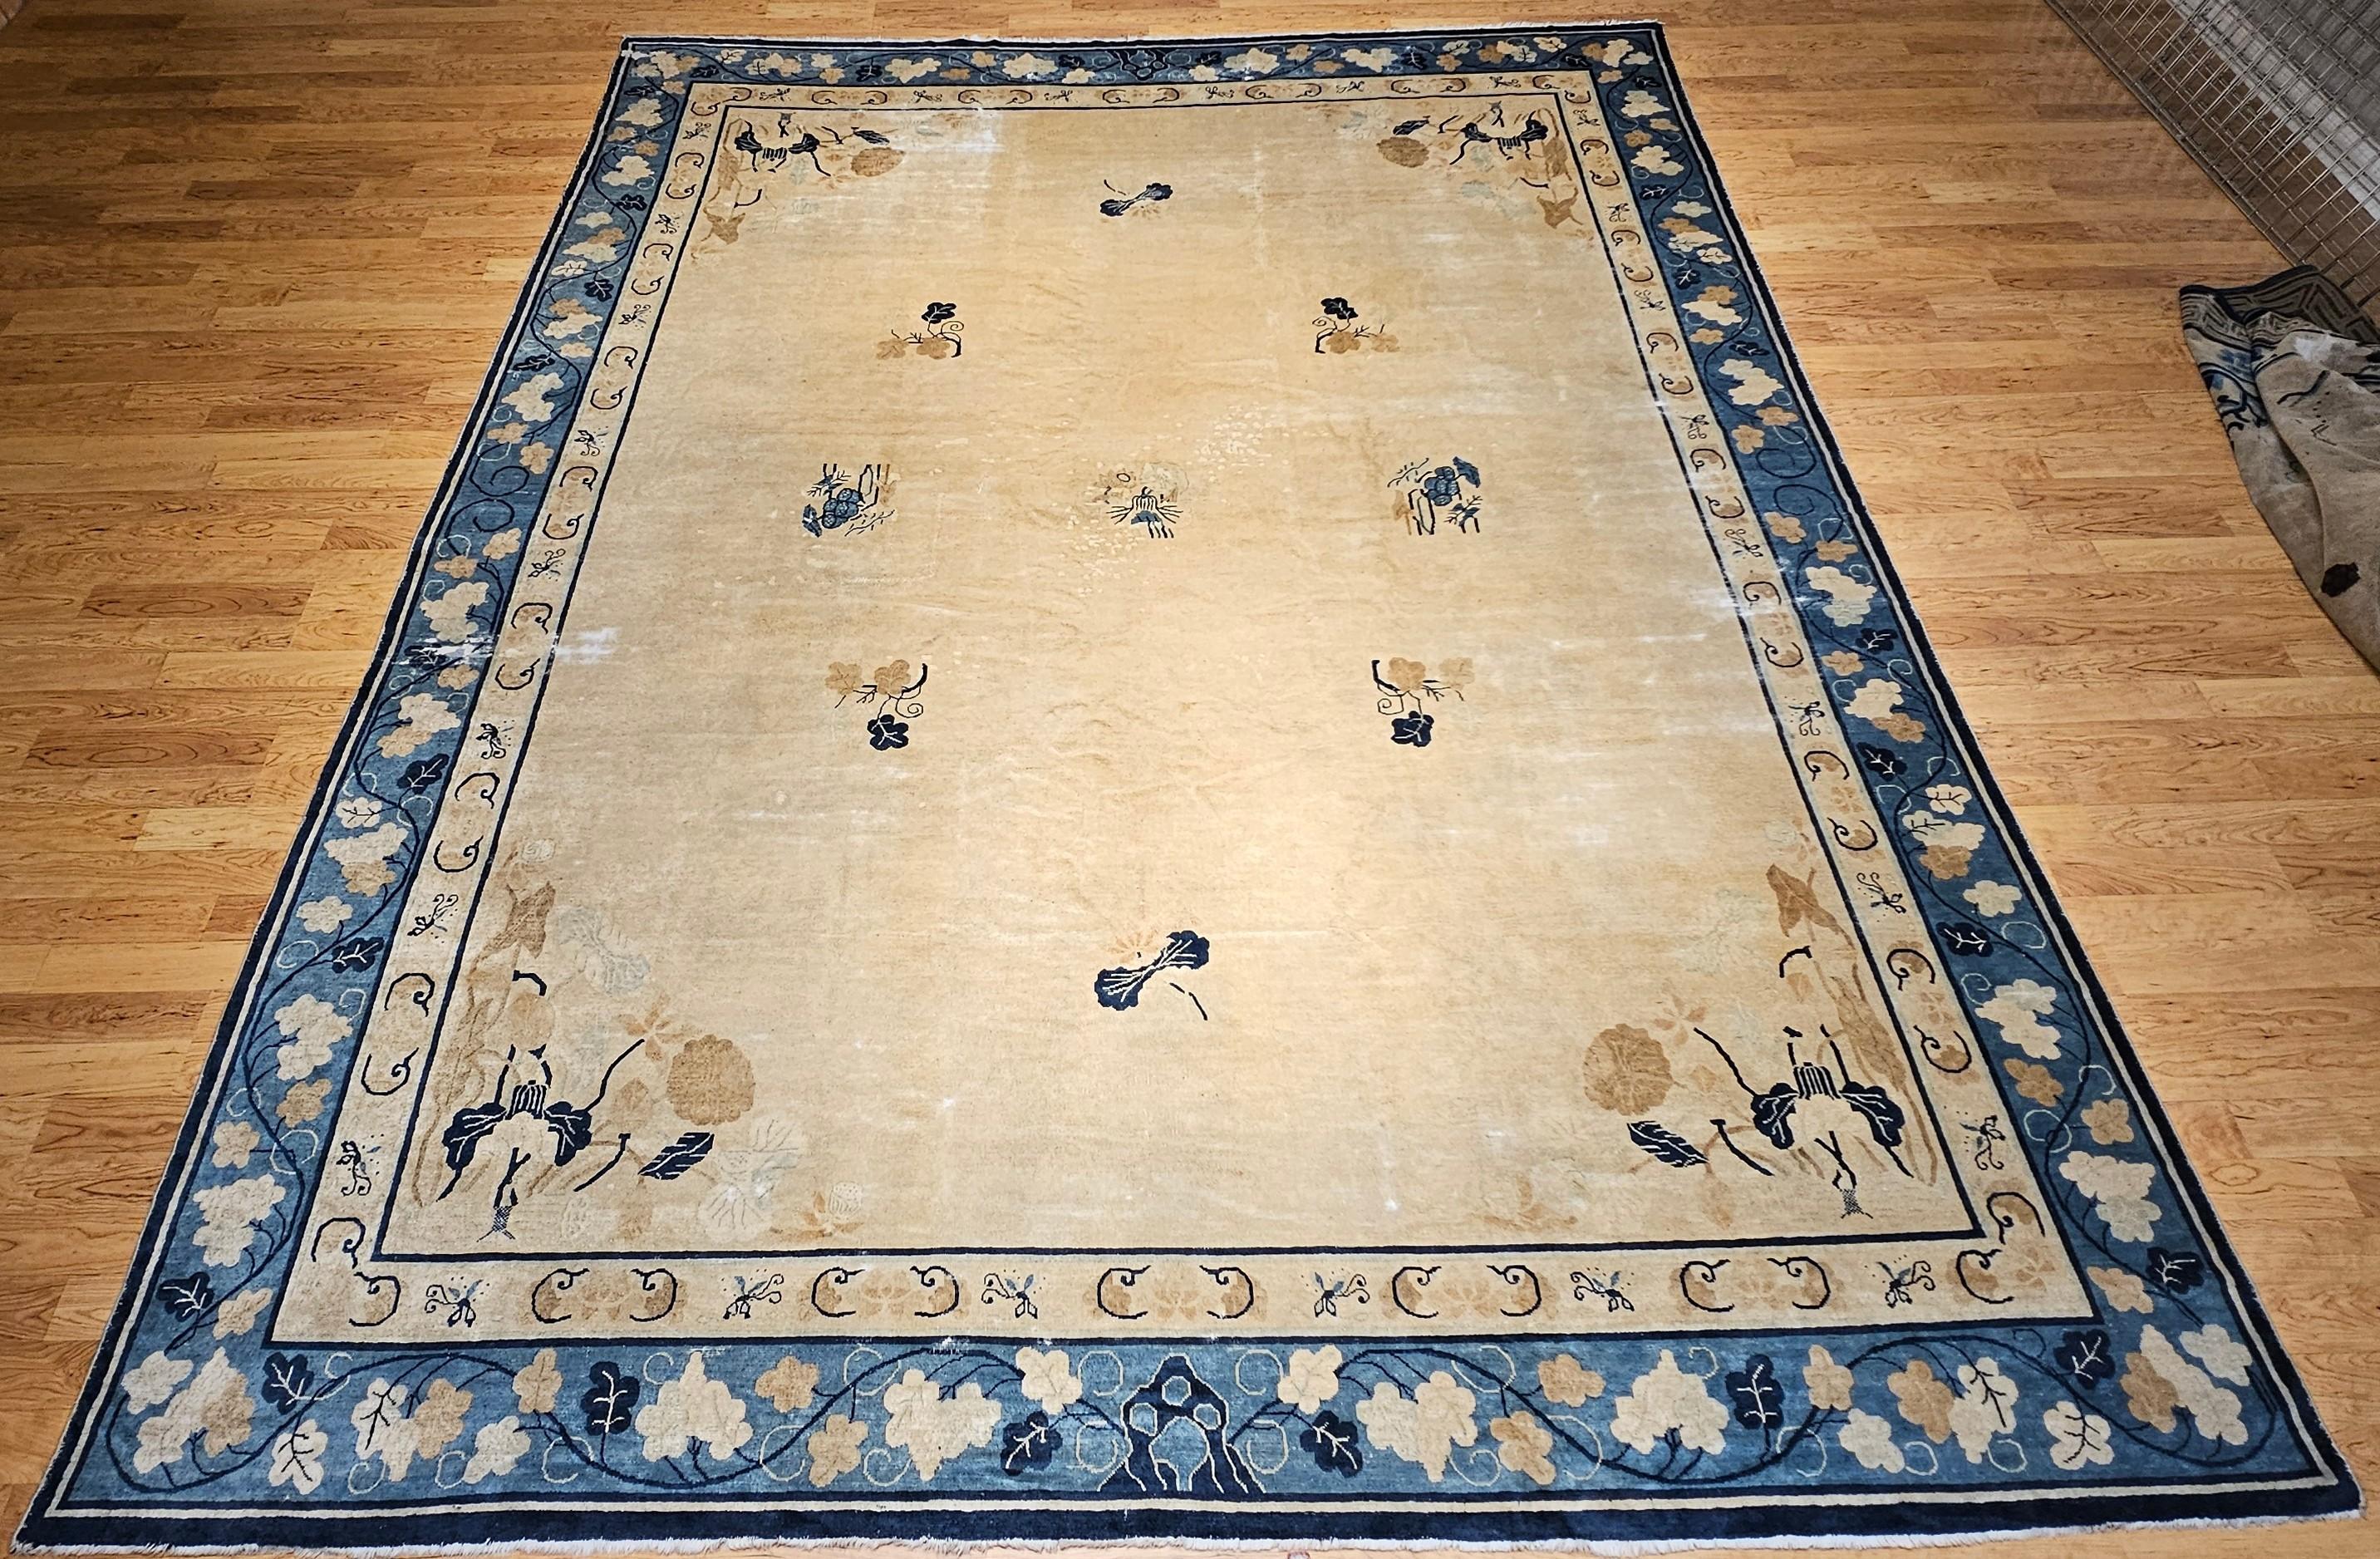 19th Century Oversized Chinese Peking Rug in Wheat, Navy, Brown, Green, Sky-Blue For Sale 4